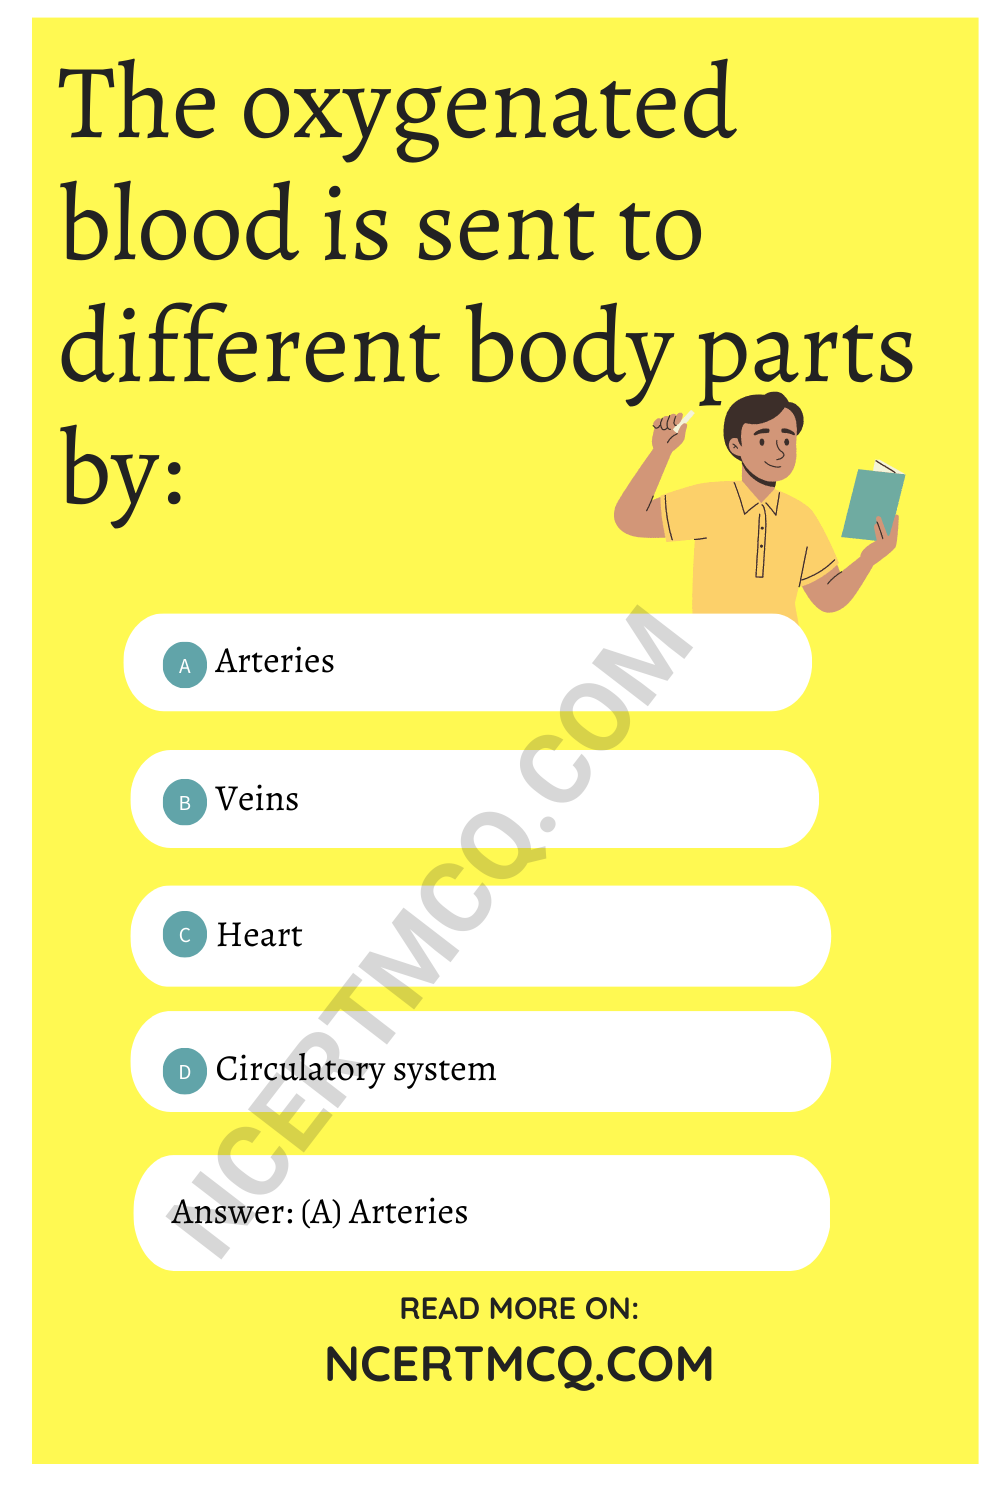 The oxygenated blood is sent to different body parts by: